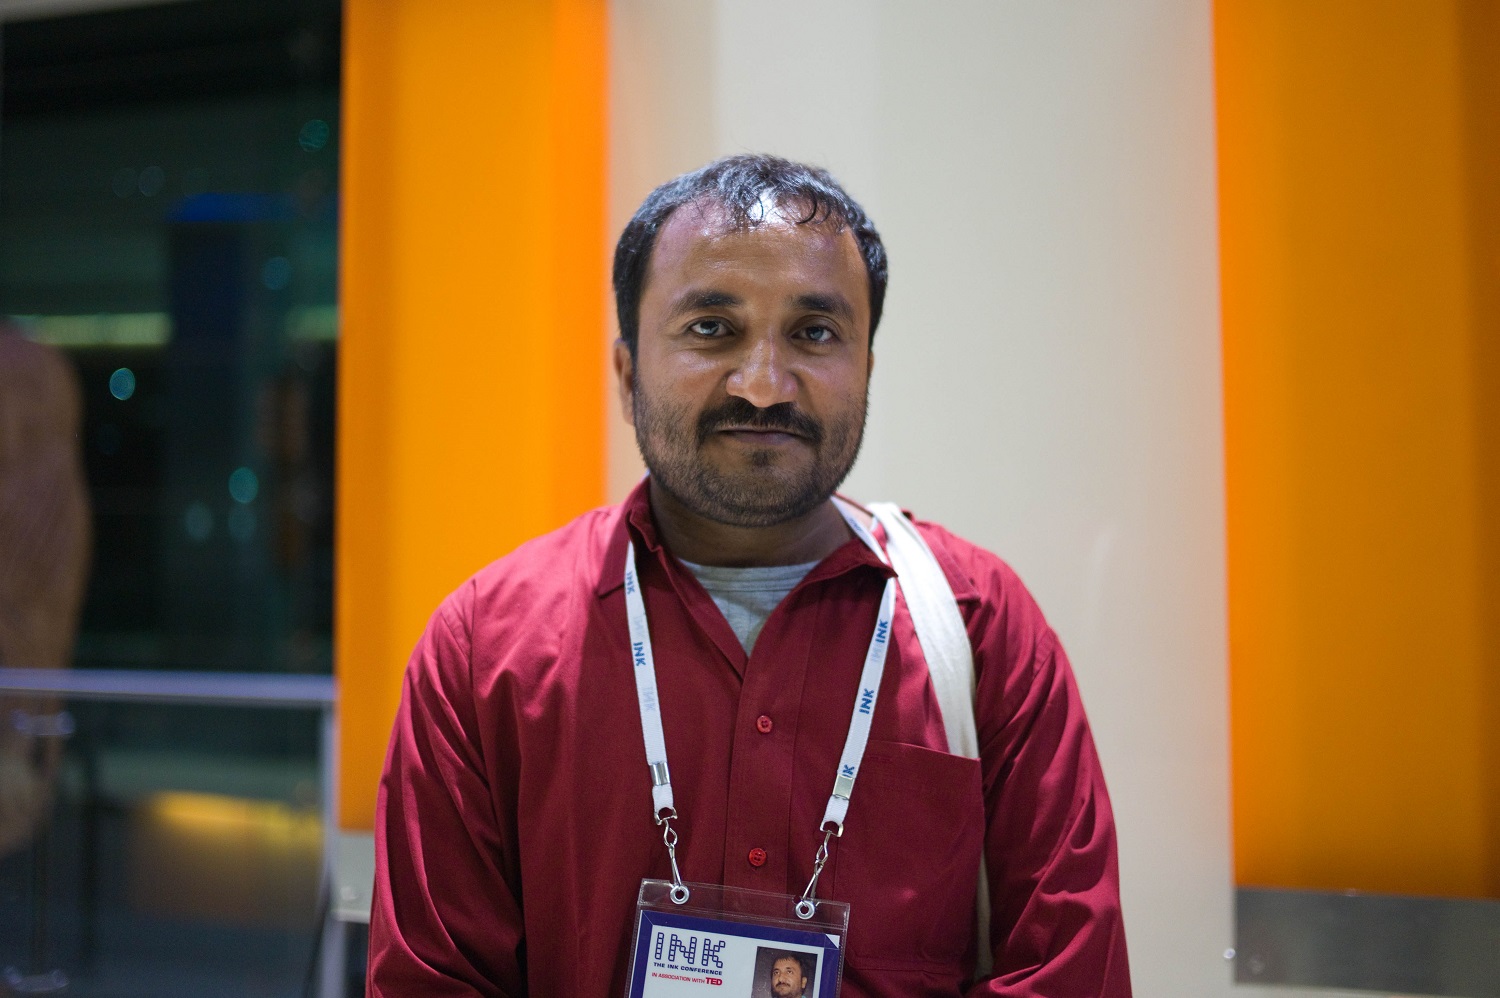 Super 30 founder Anand Kumar to be main attraction at Republic Day function in US